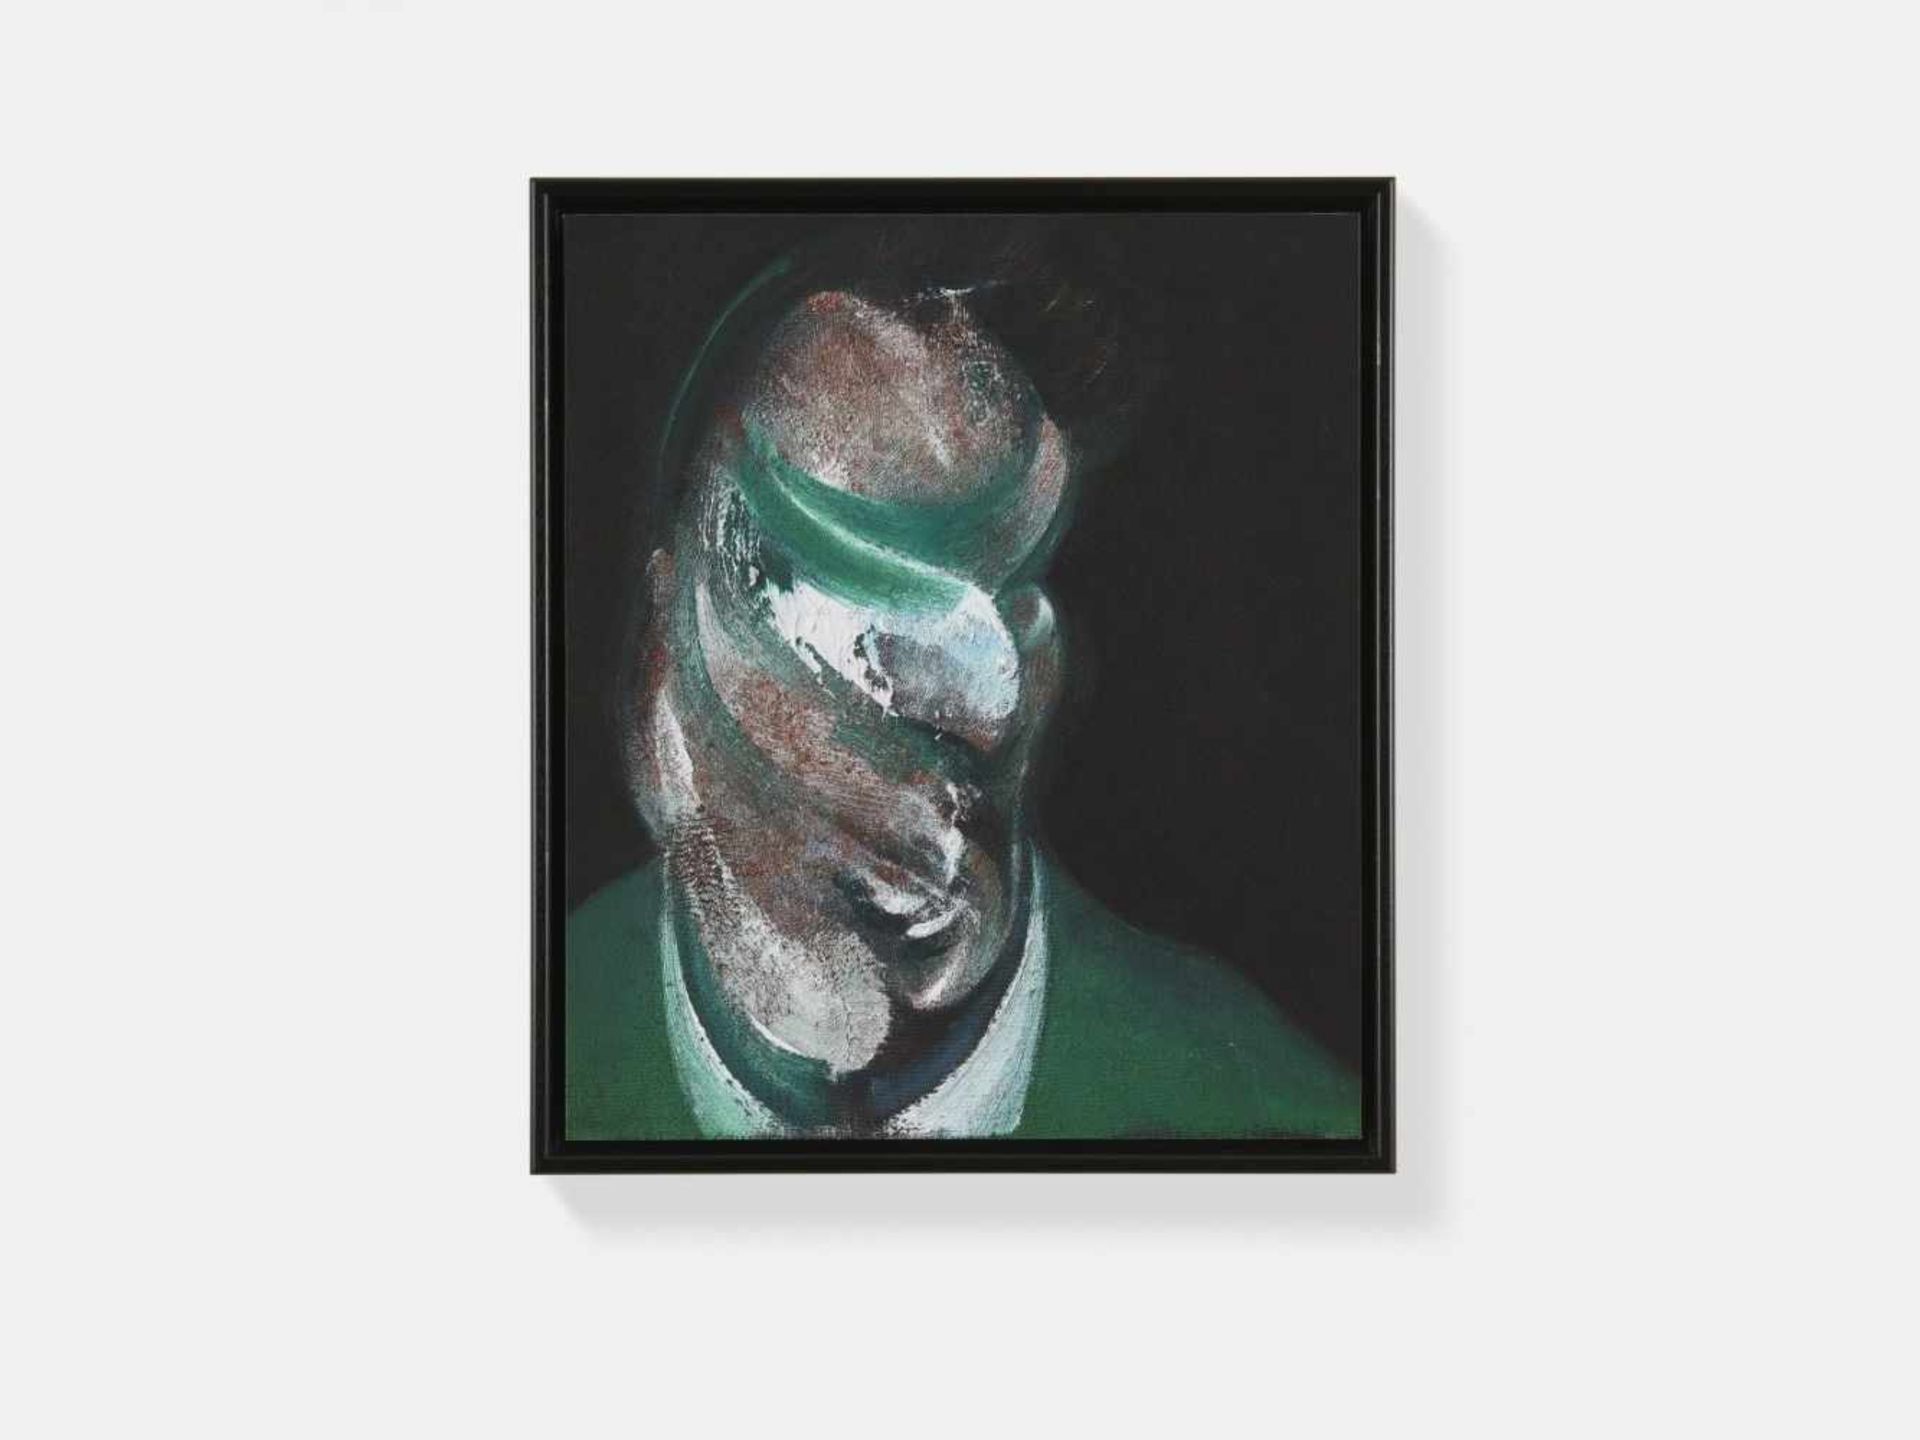 Francis Bacon (after) - Study for Head of Lucian FreudFrancis Bacon (after) - Study for Head of